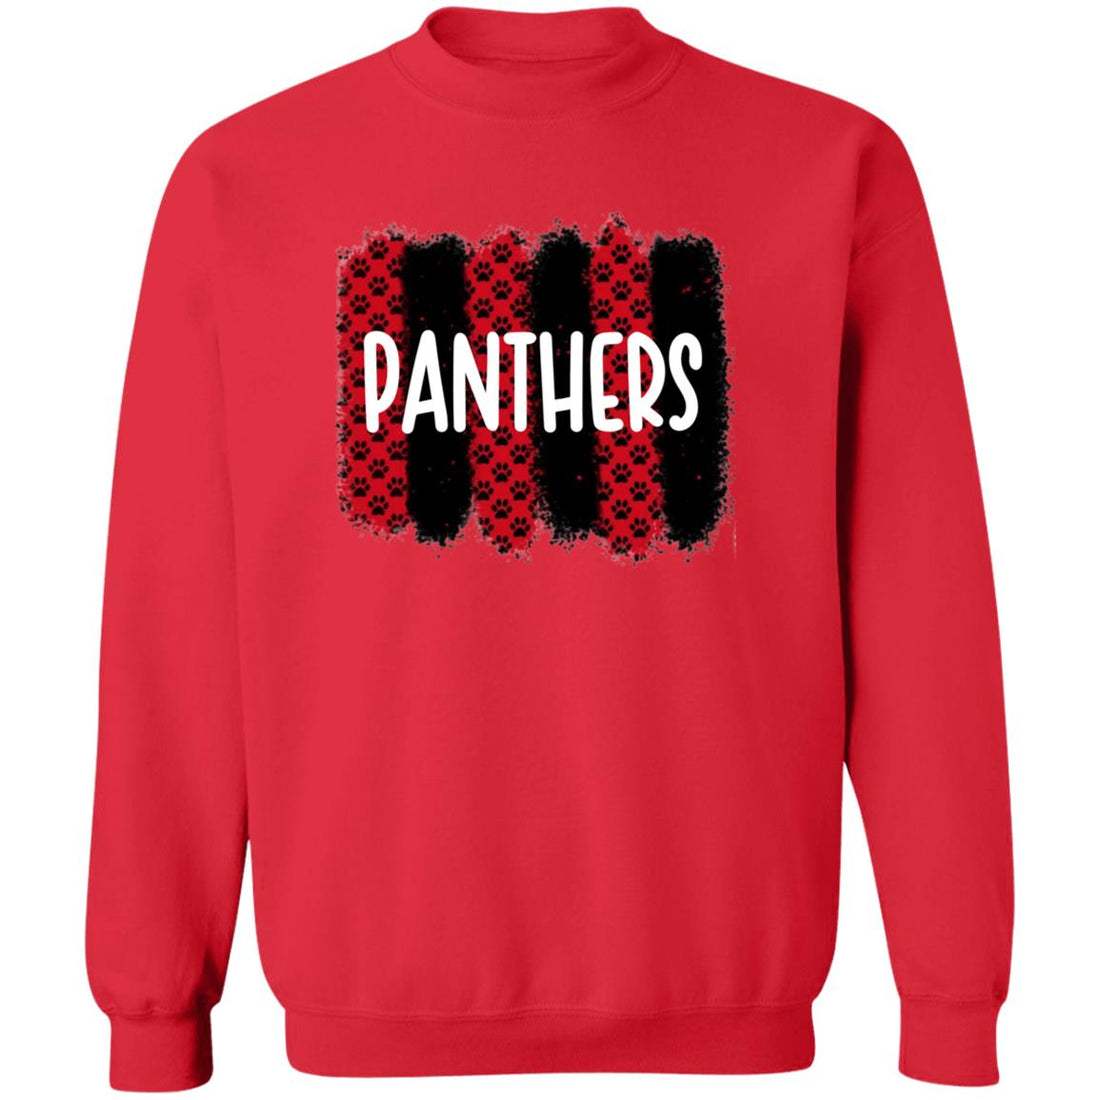 Panther Paw Tracks Crewneck Pullover Sweatshirt - Sweatshirts - Positively Sassy - Panther Paw Tracks Crewneck Pullover Sweatshirt